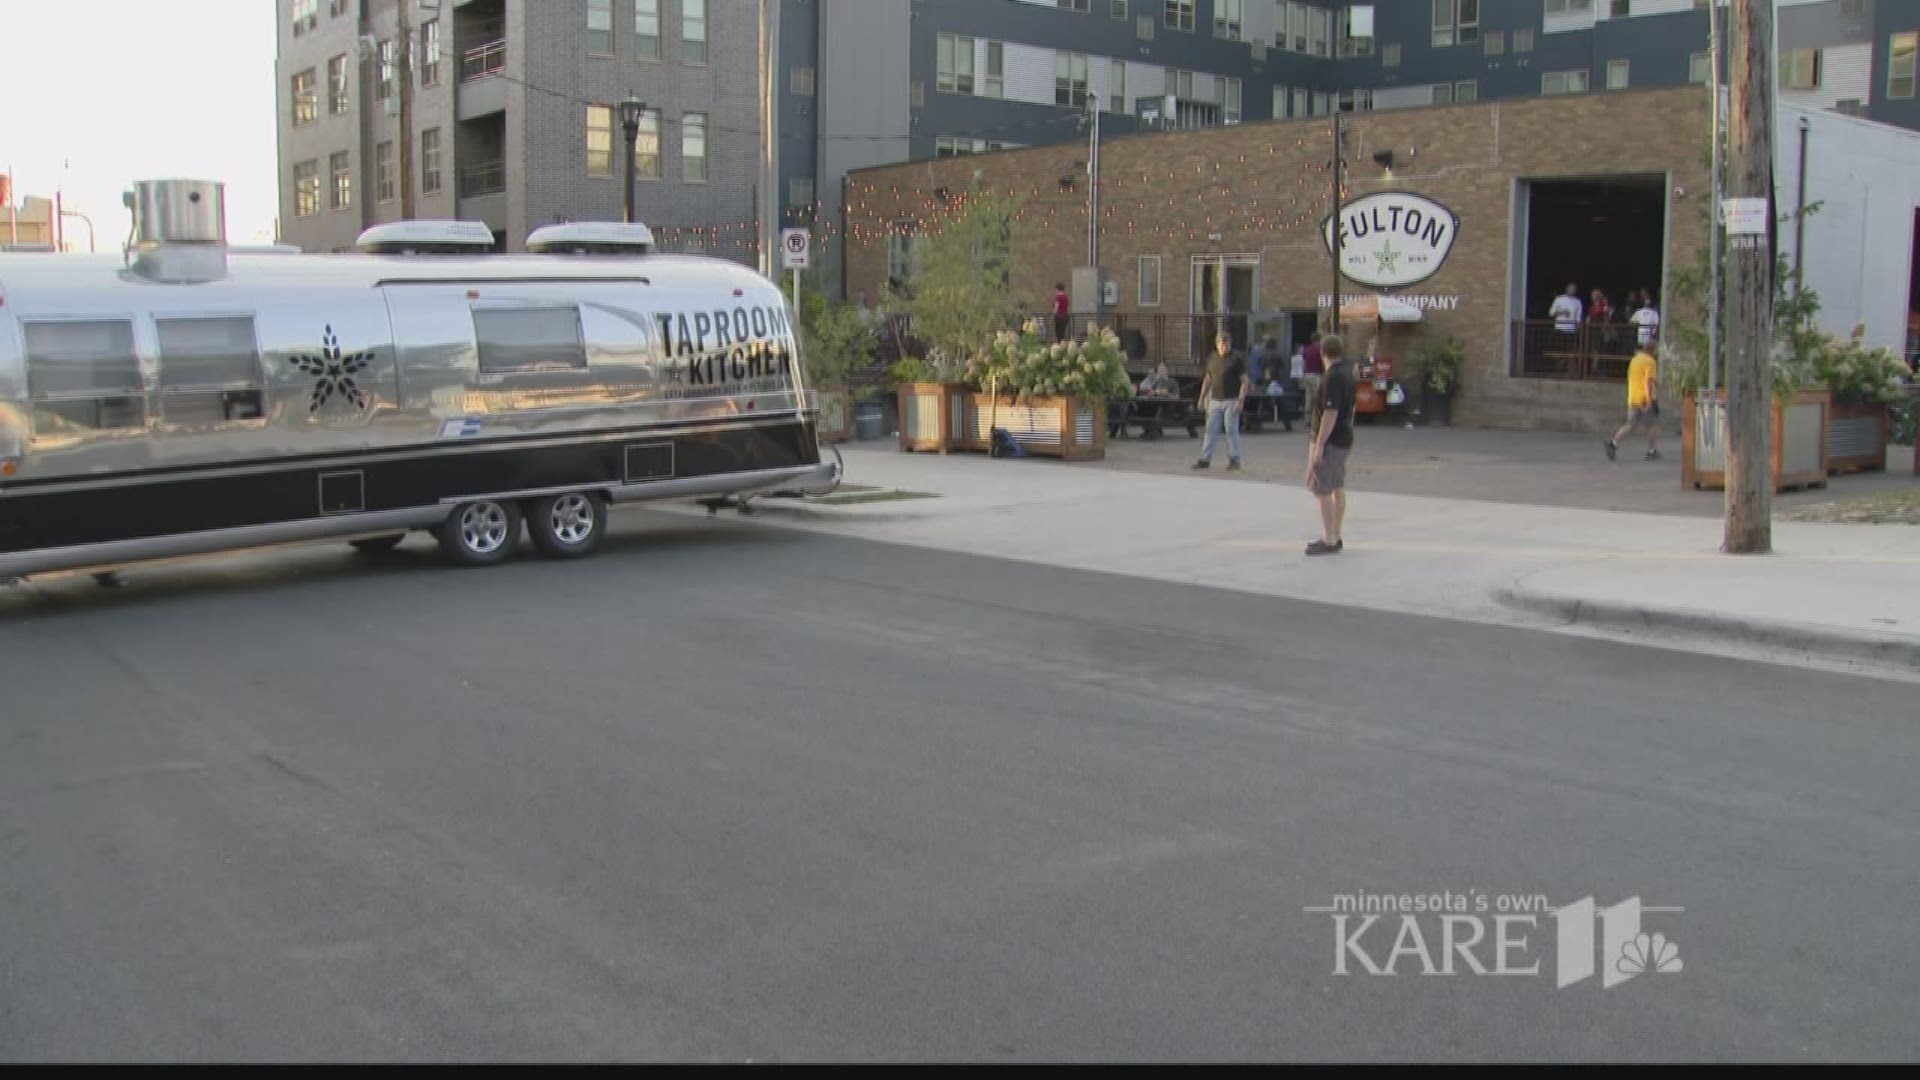 Fulton Taproom in the North Loop will soon be serving its own food out of a refurbished Airstream. http://kare11.tv/2f2rLWs